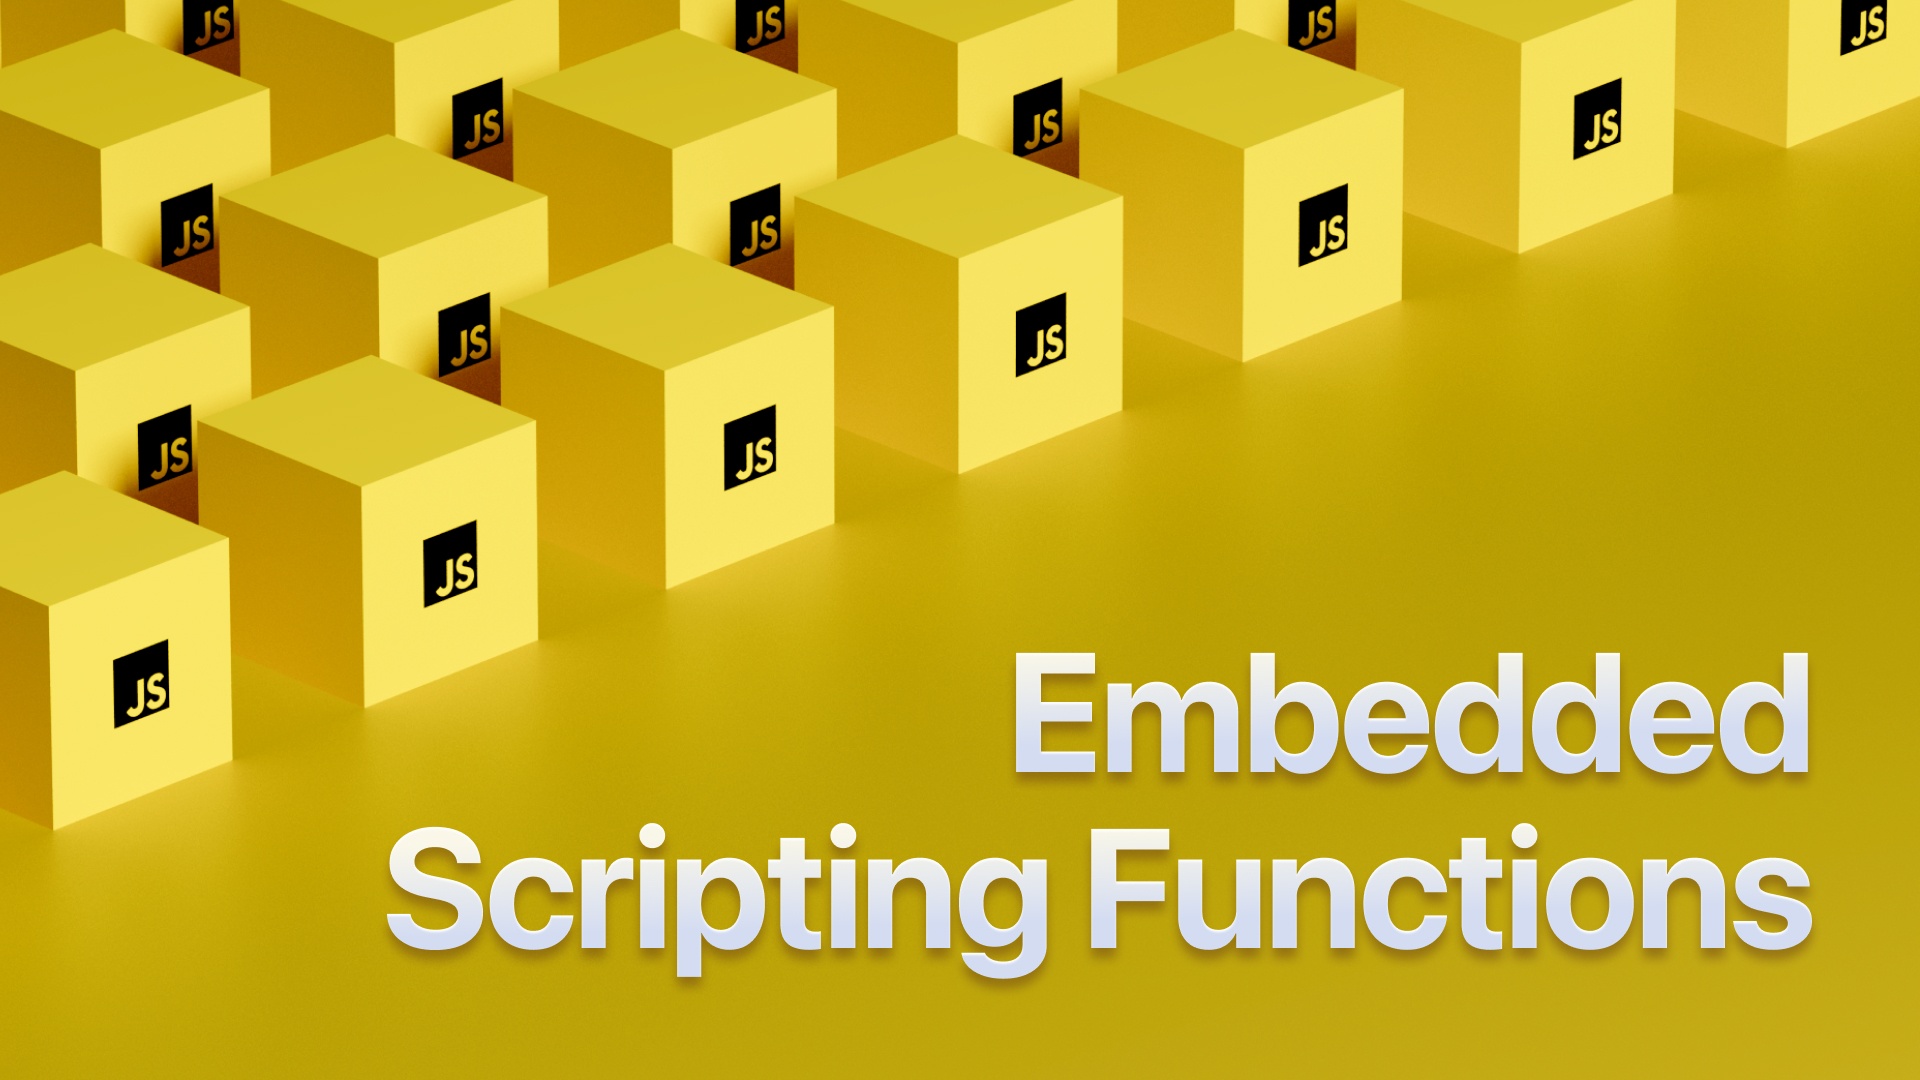 Embedded Scripting Functions